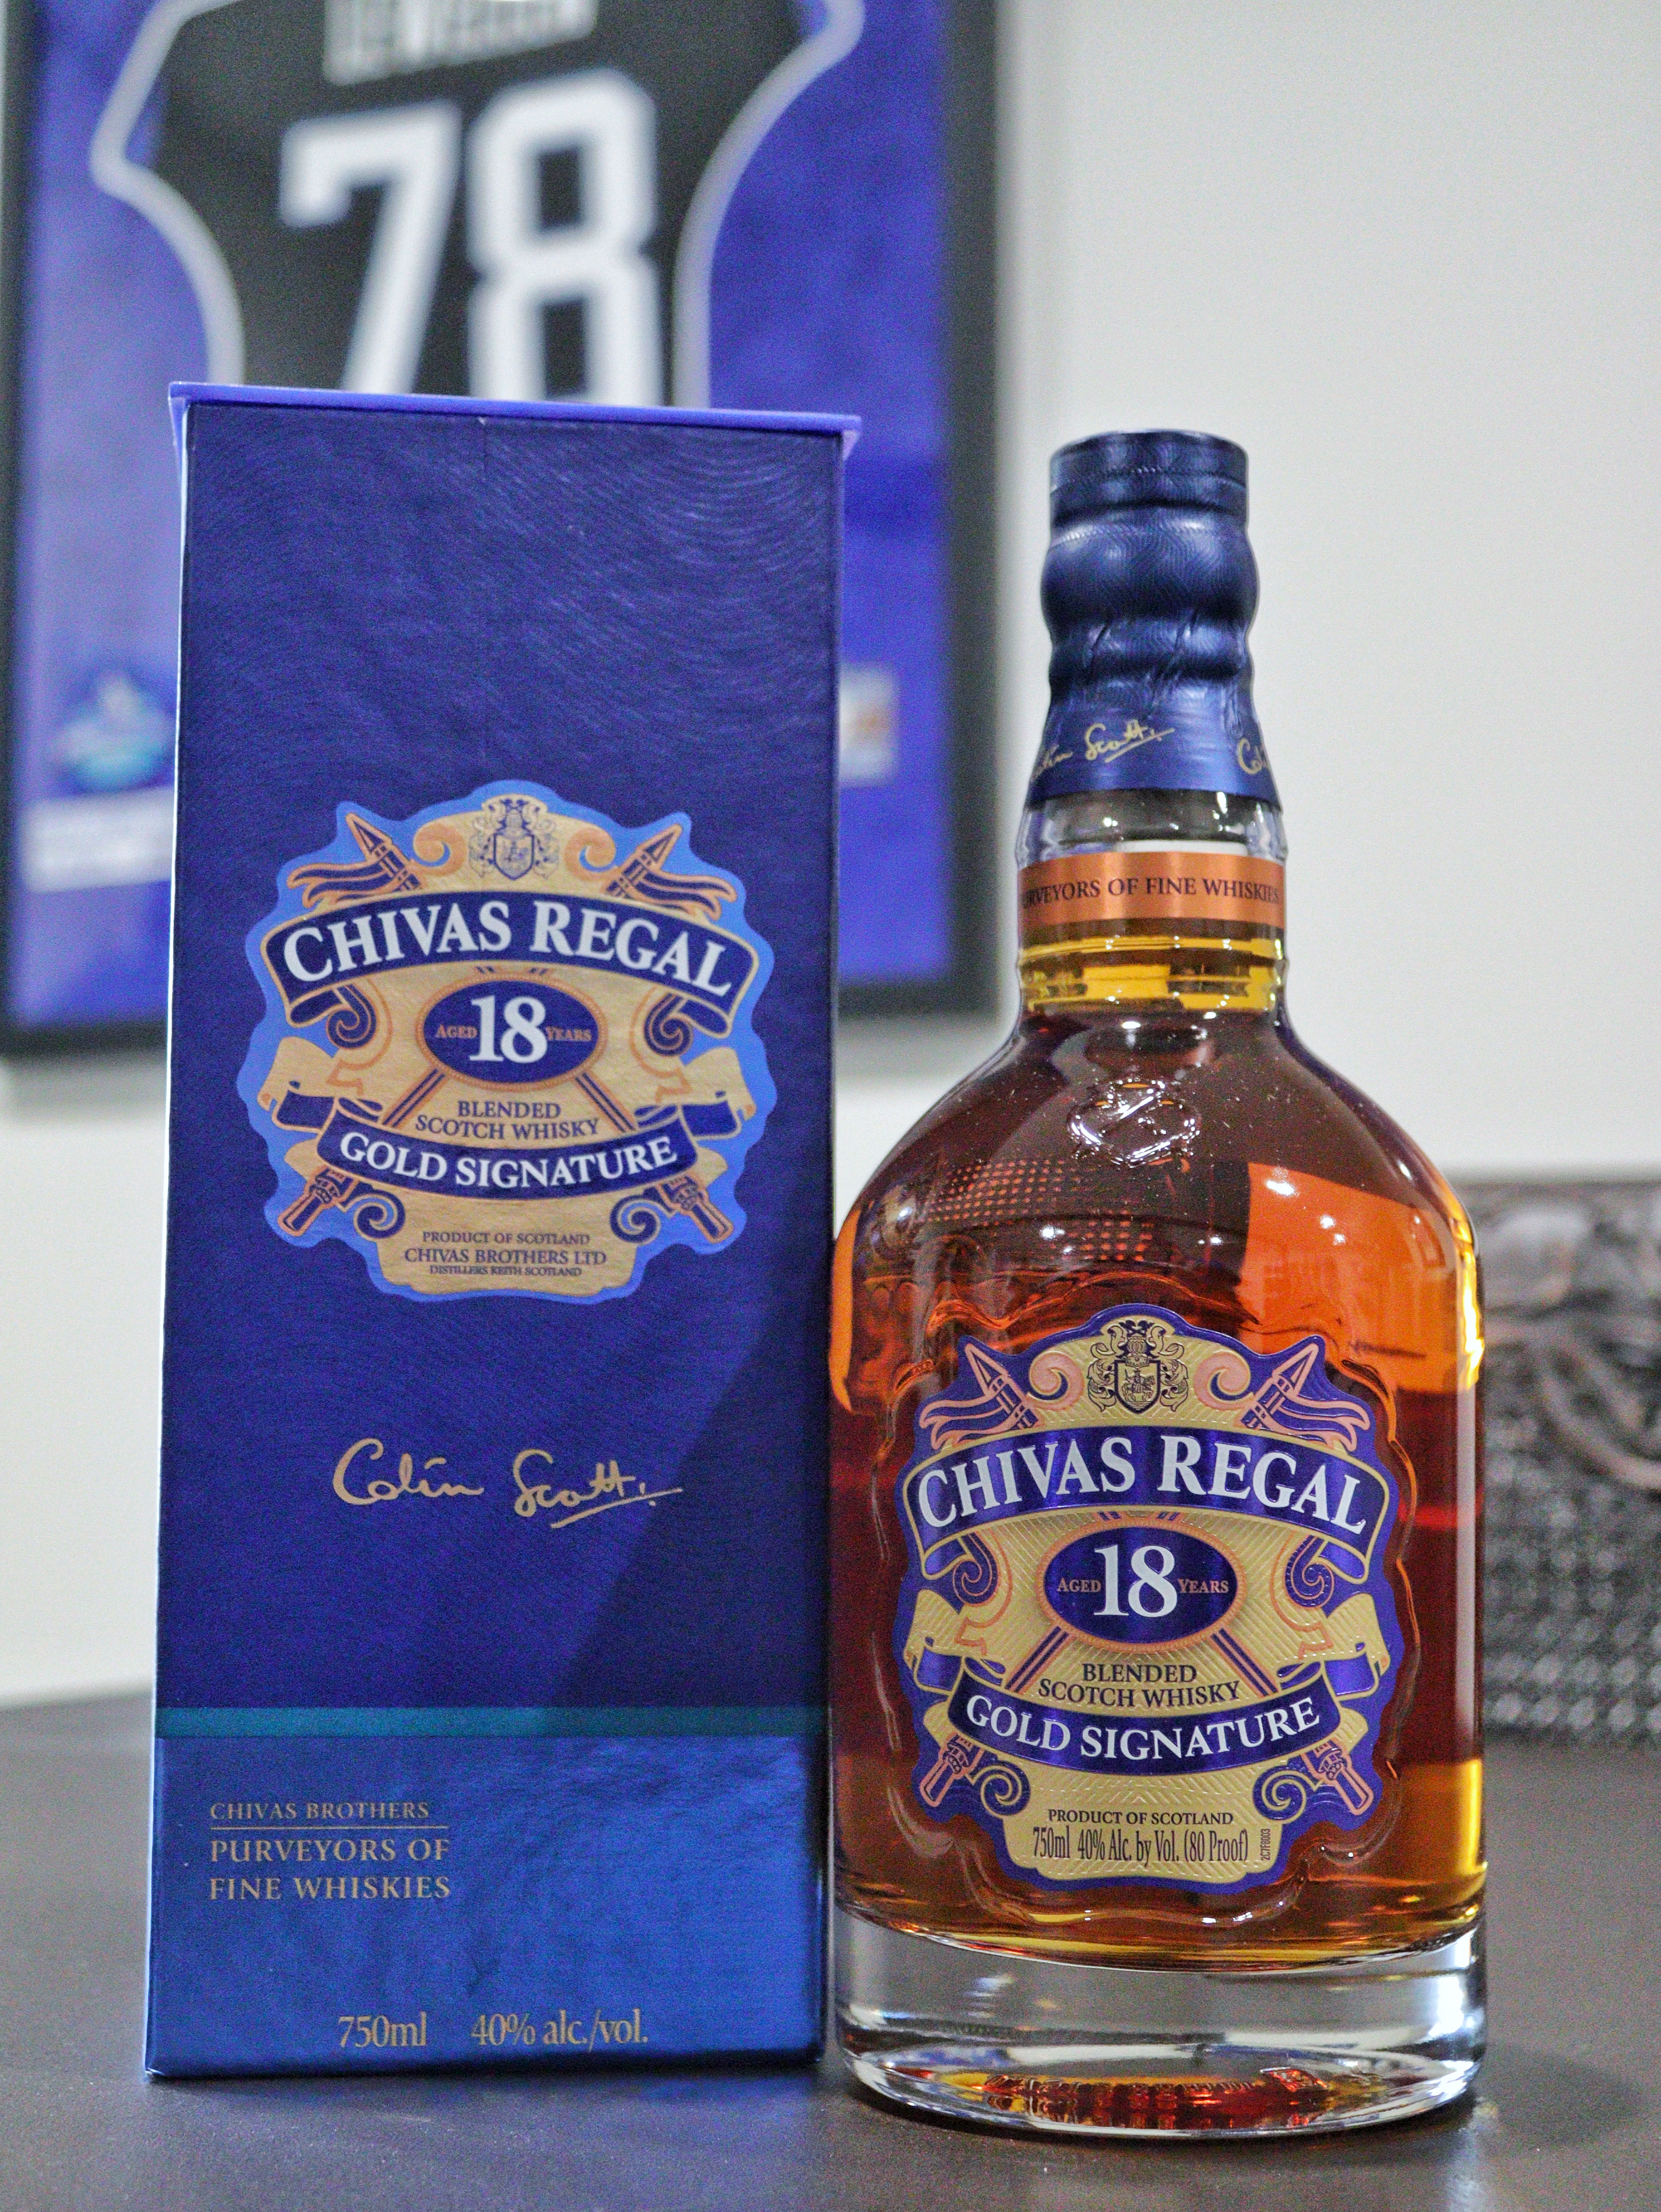 Chivas Regal Gold Signature 18year Blended Scotch Whisky :: Blended Scotch